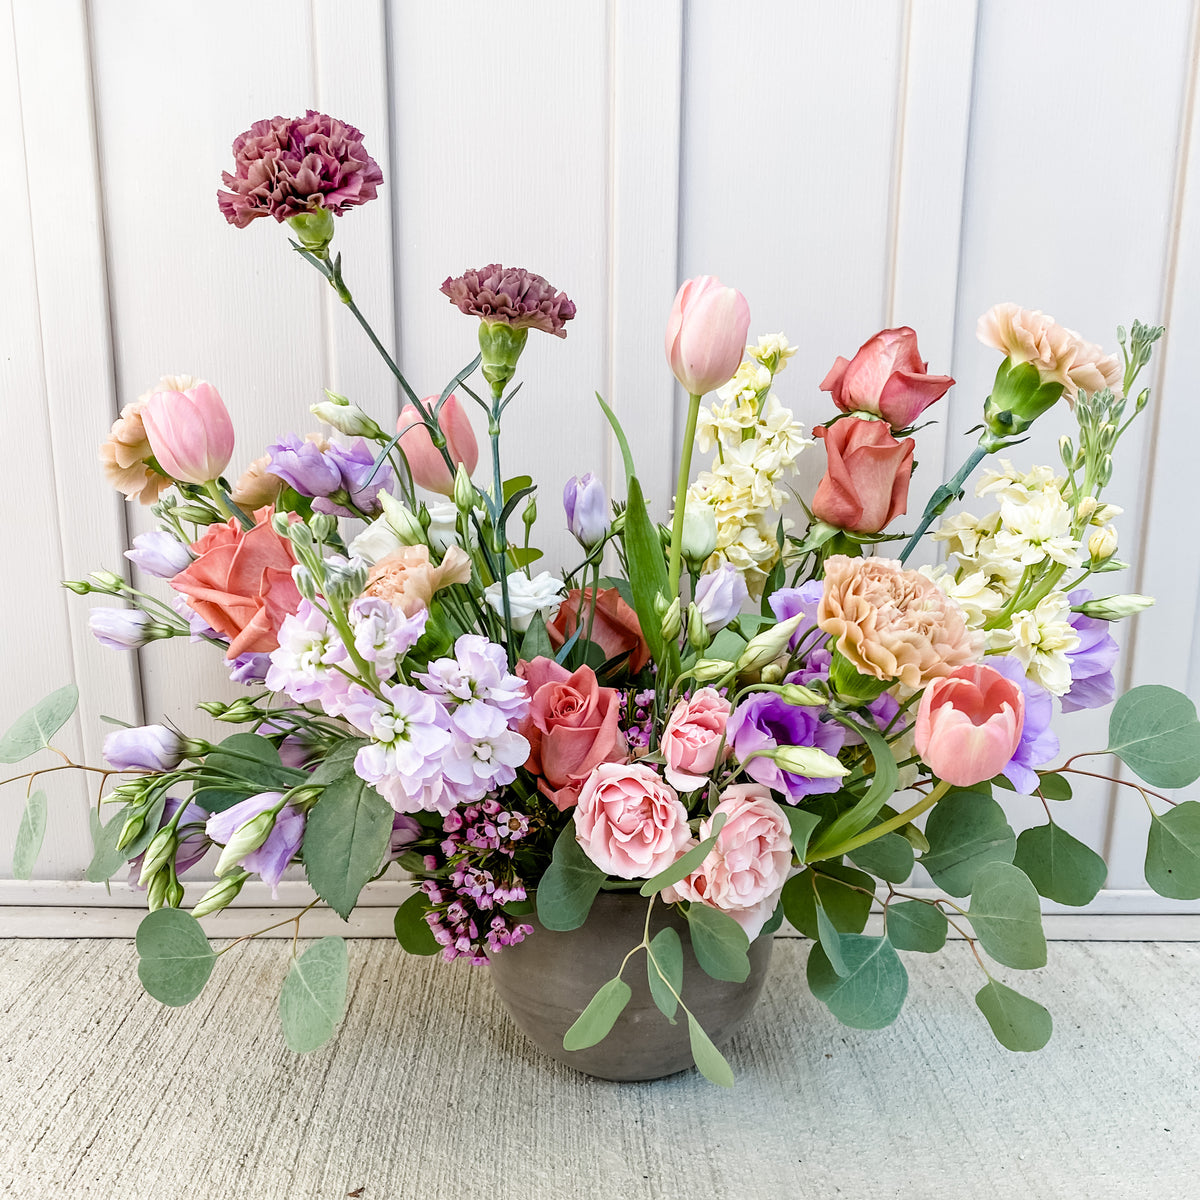 Floral Subscription Bright and Colorful handed arrangement - extra large  $150